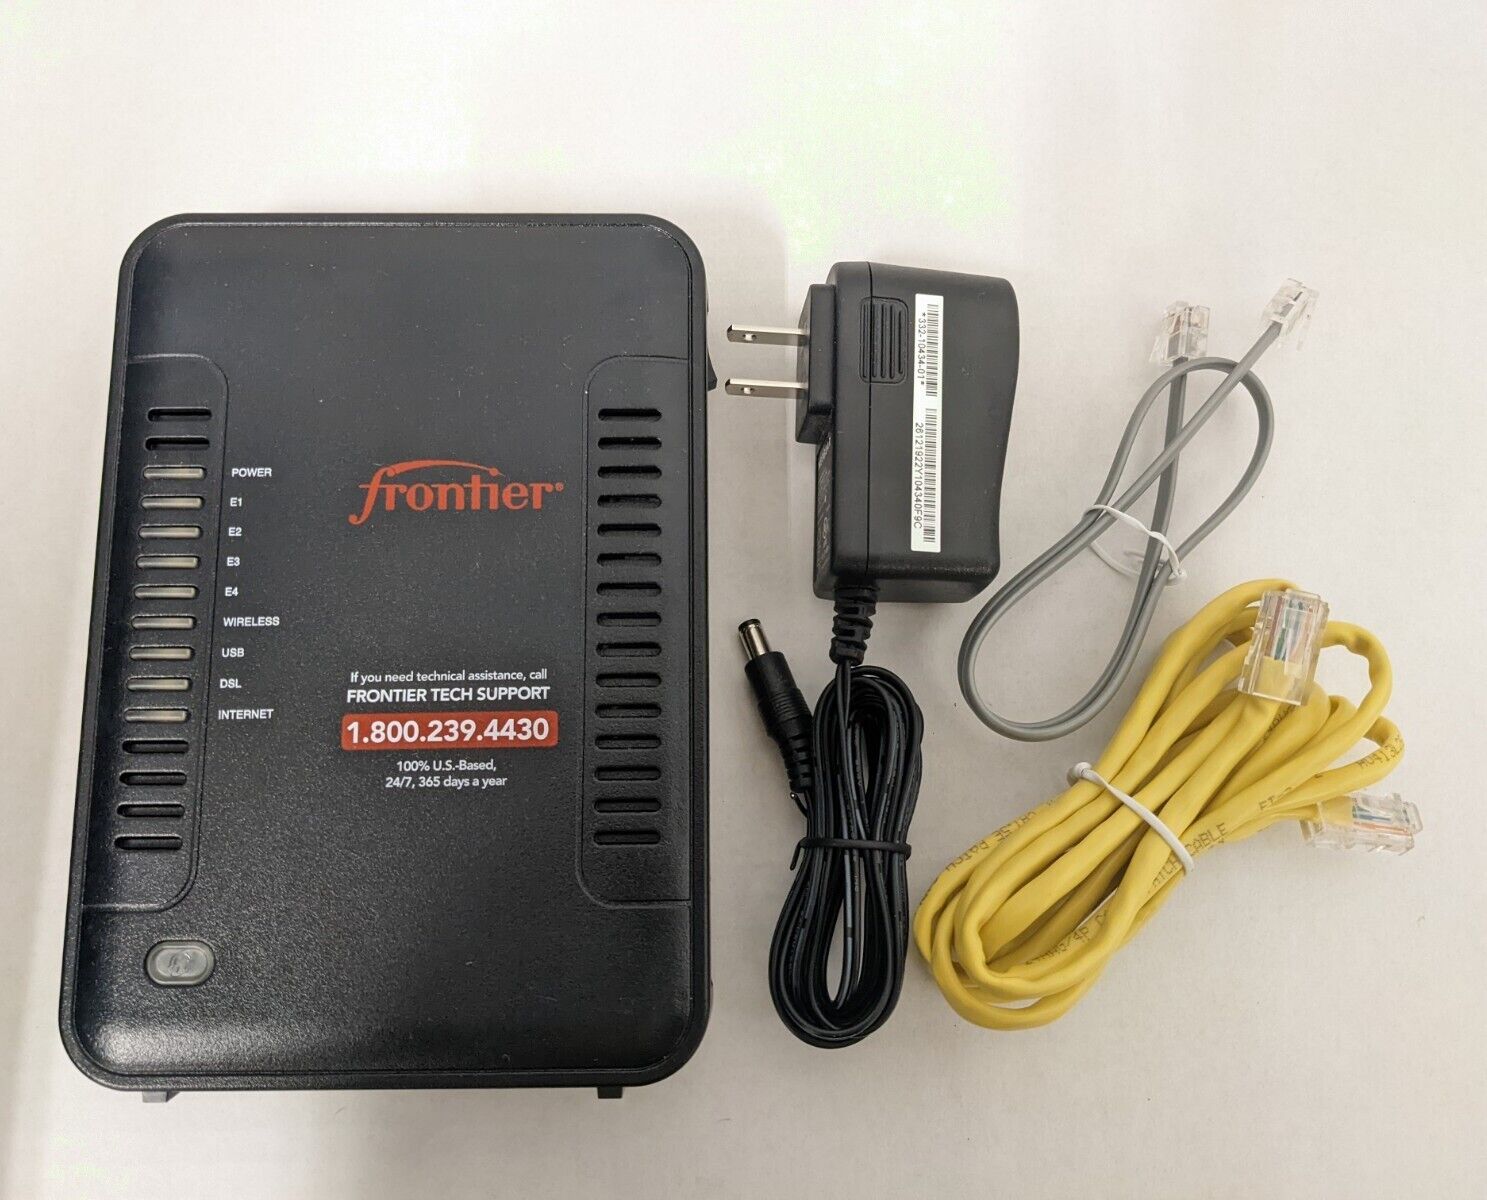 Netgear 7550 B90-755044-15 Frontier ADSL2+ Modem Router With Power Adapter Cable